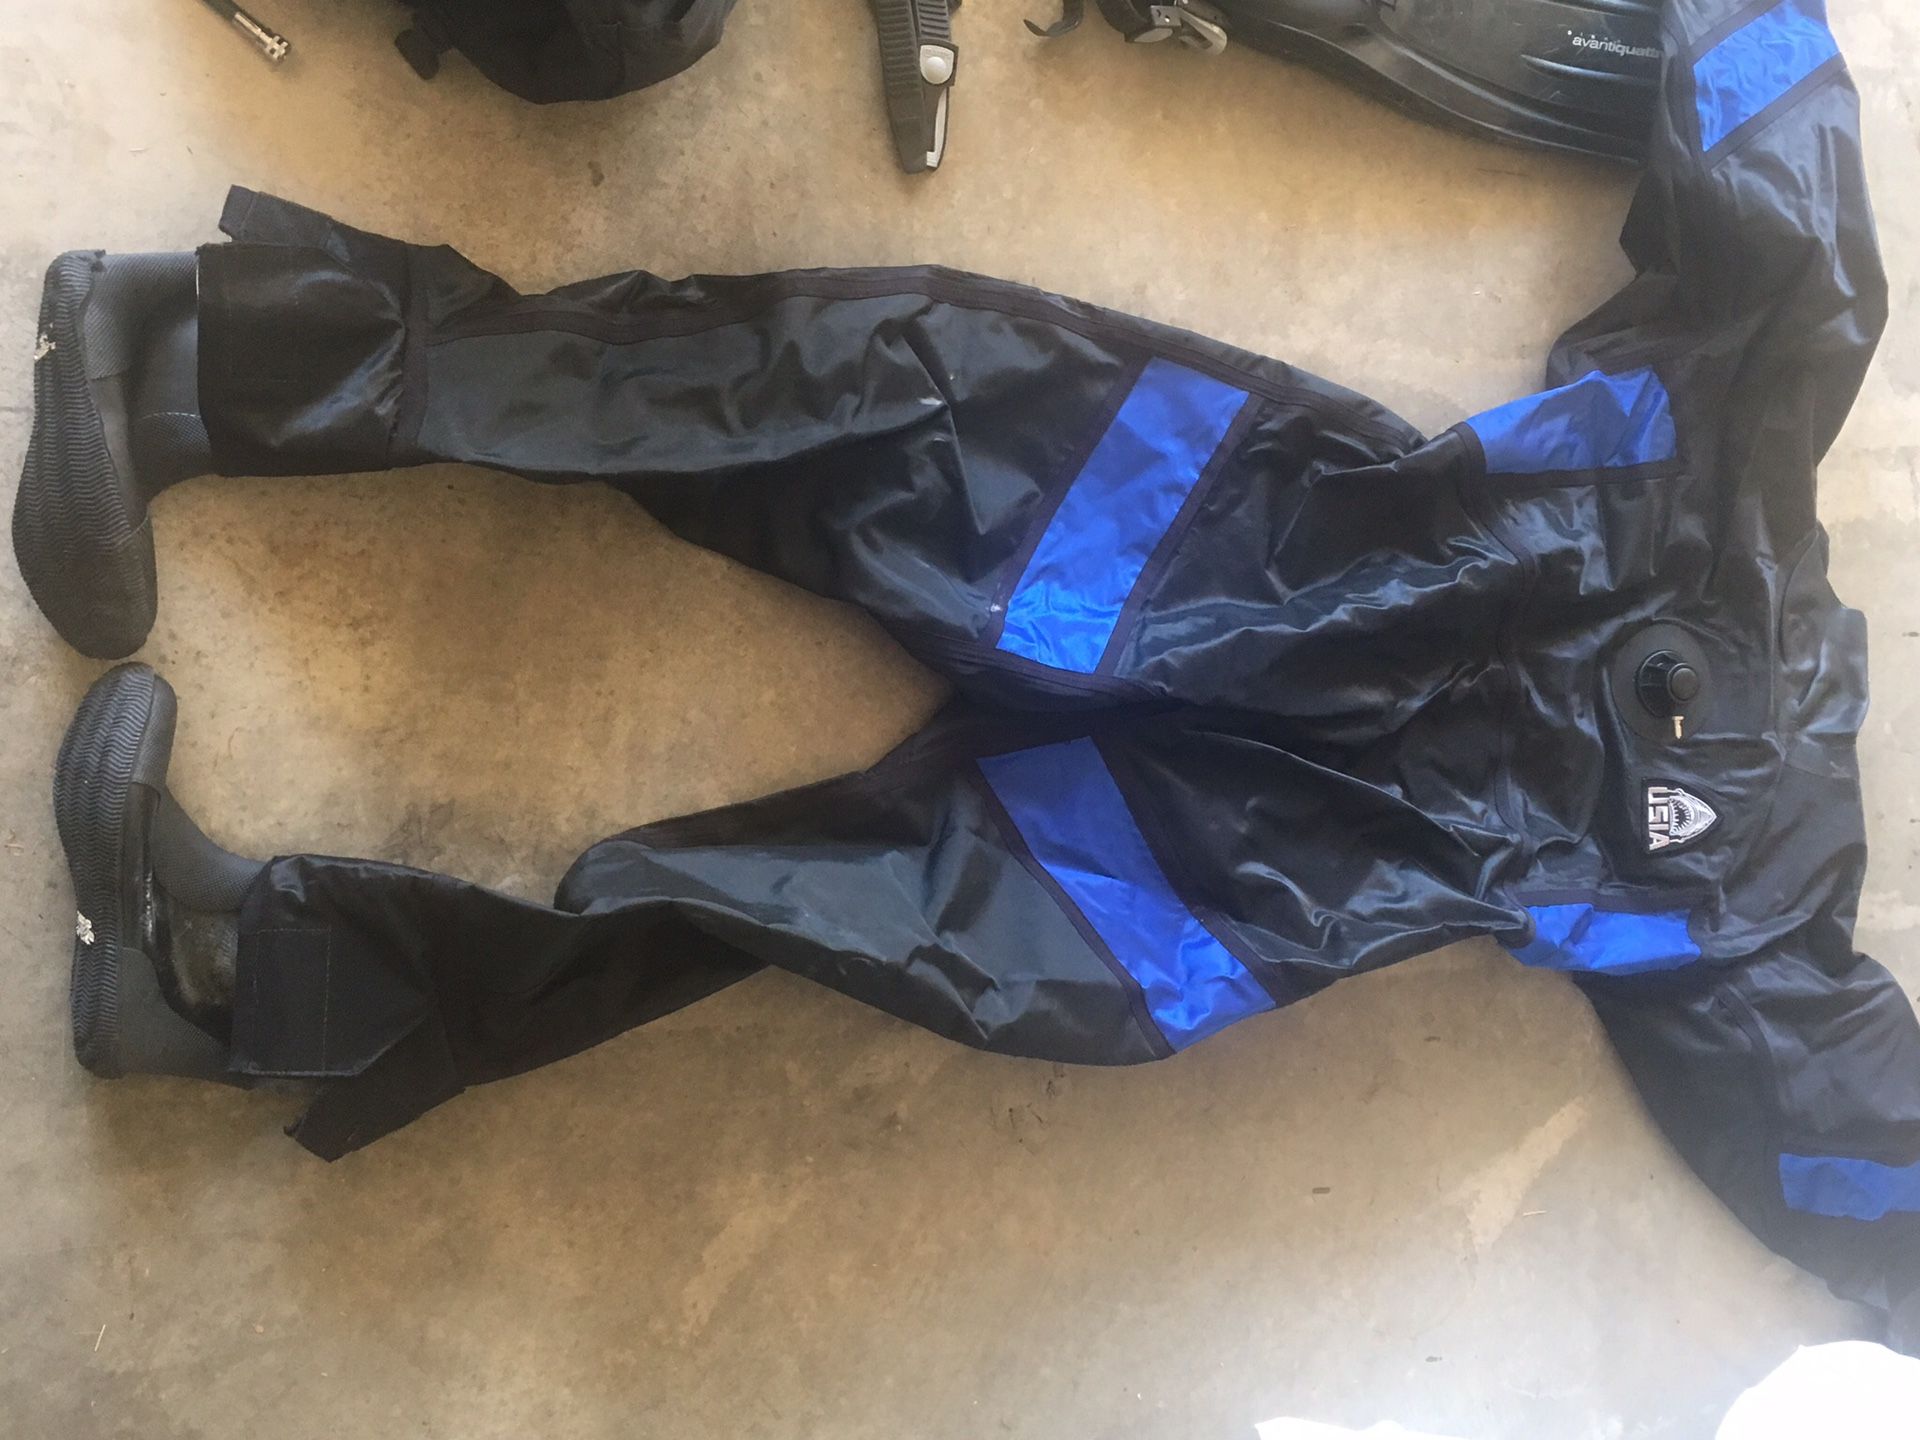 USIA drysuit, BC and other dive gear